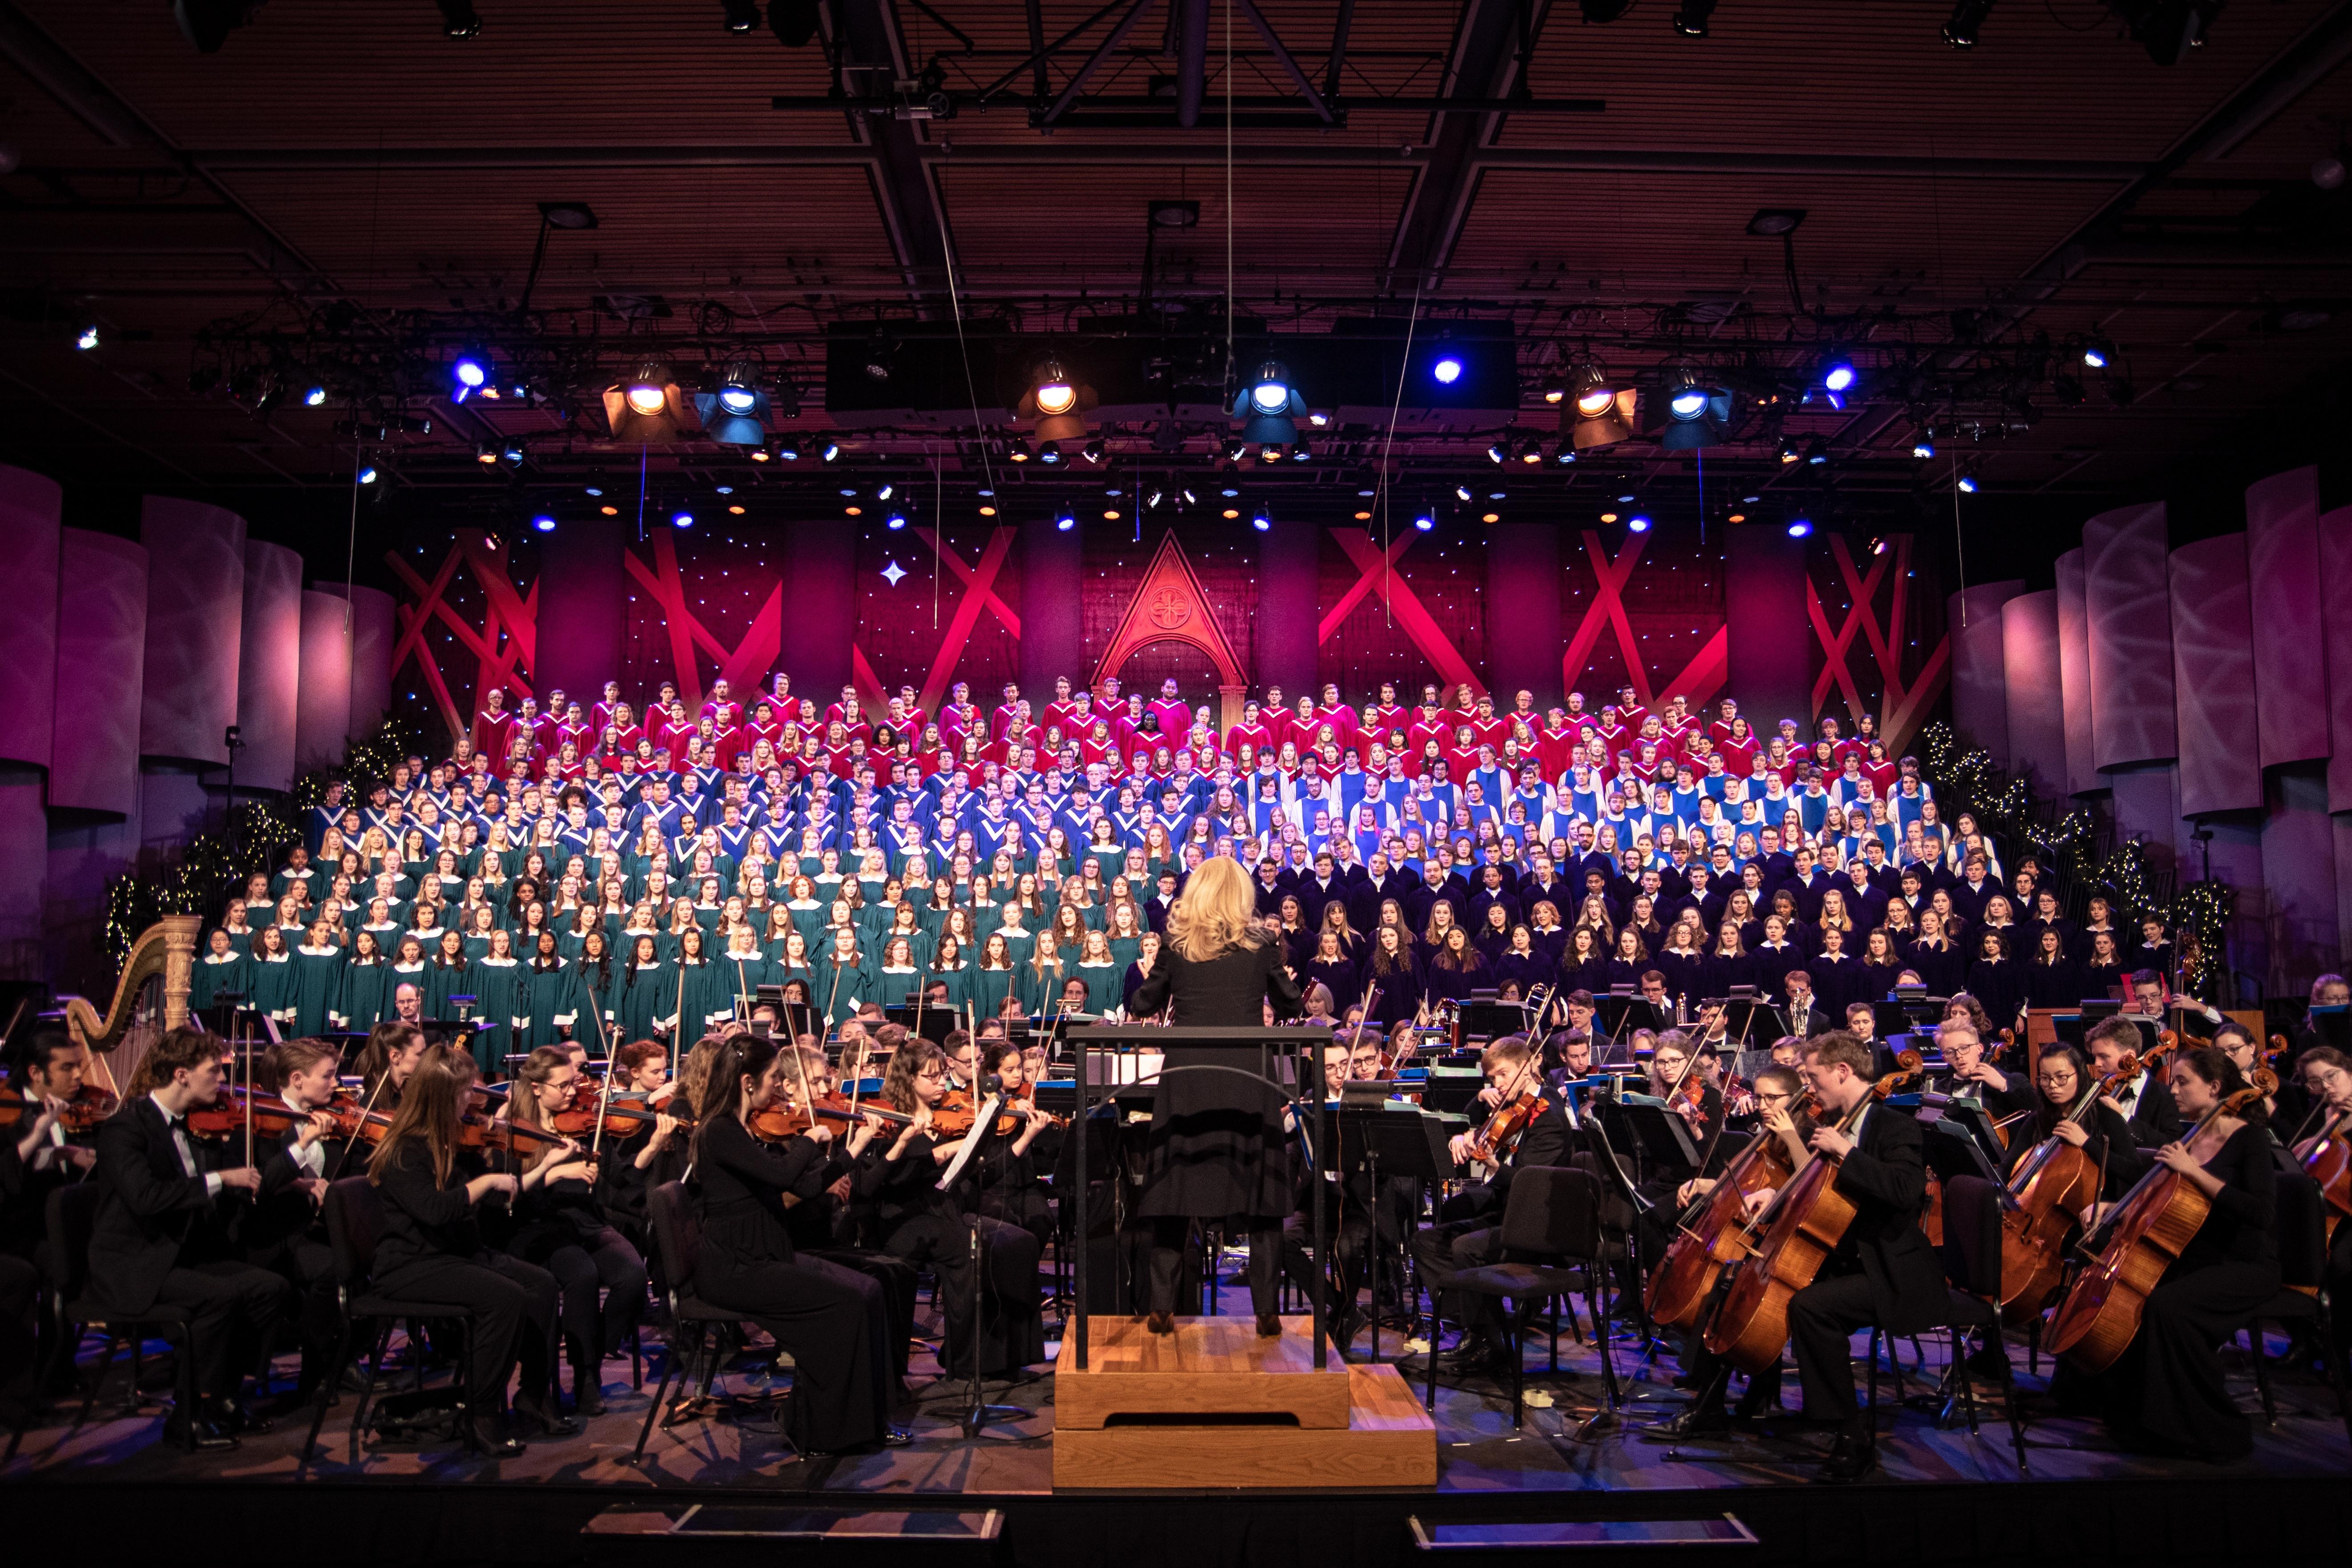 The St Olaf Christmas Festival: A New Song of Grace and Truth